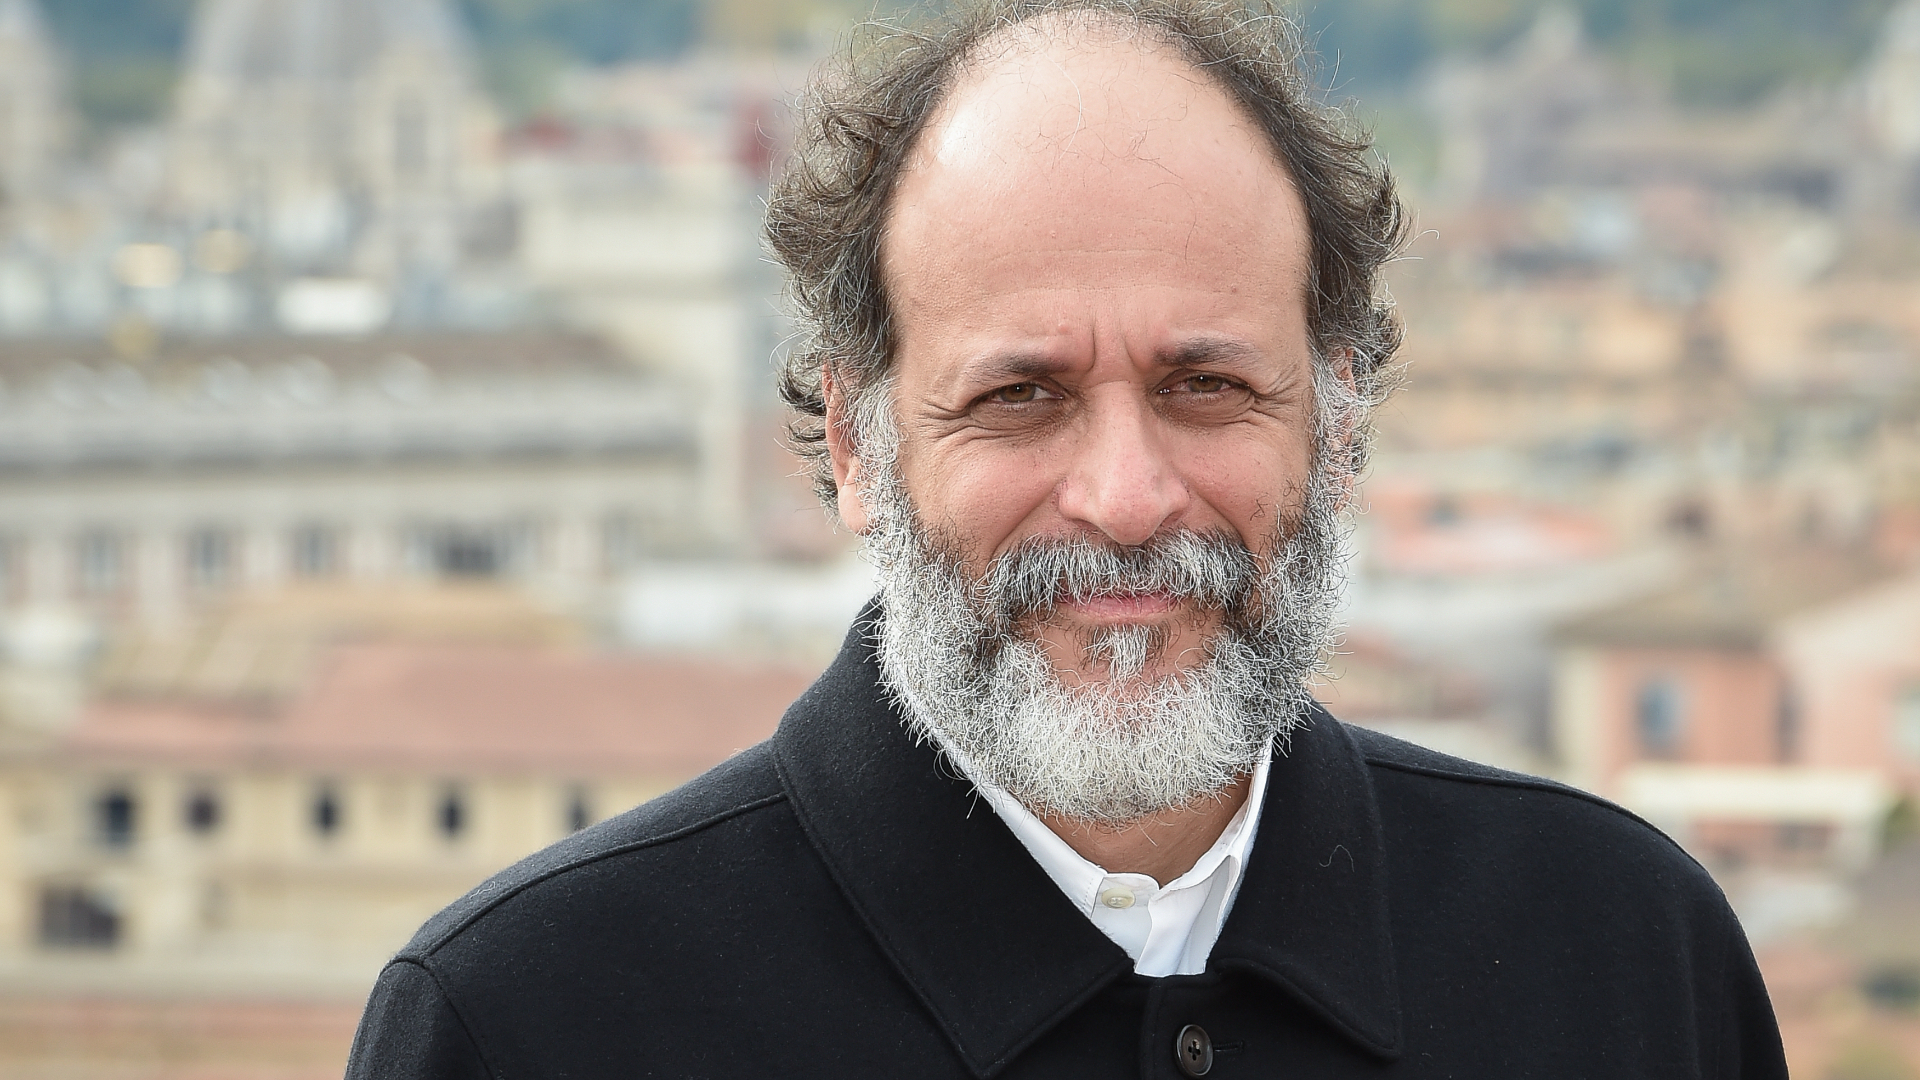 Luca Guadagnino talks Bones and All, Timothée Chalamet, and Call Me By Your Name copycats